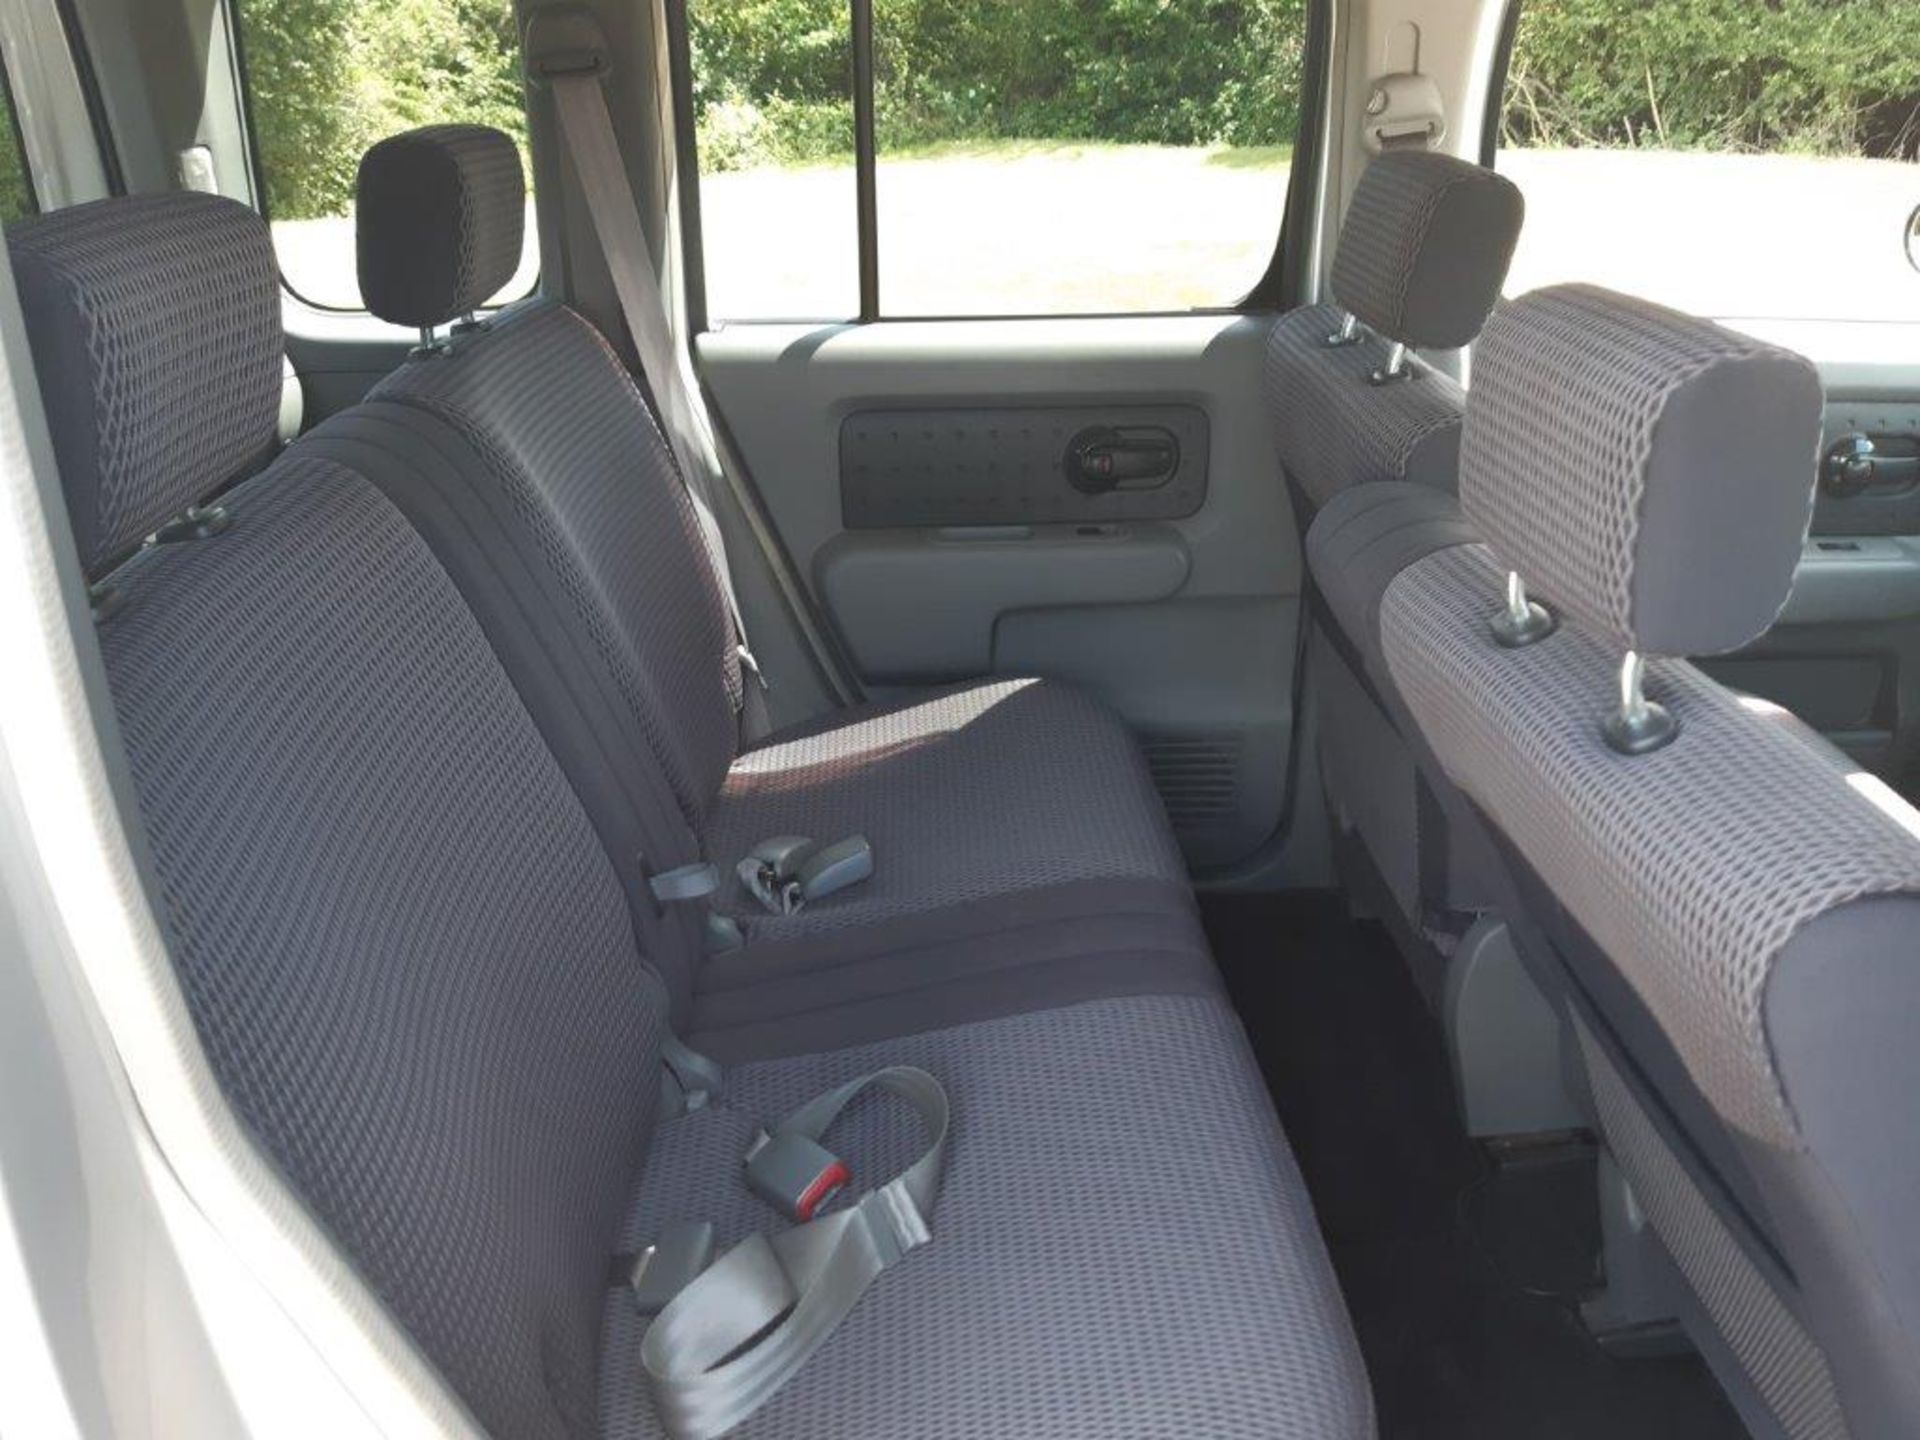 2003 Nissan Cube 1.4 Auto - Image 6 of 9